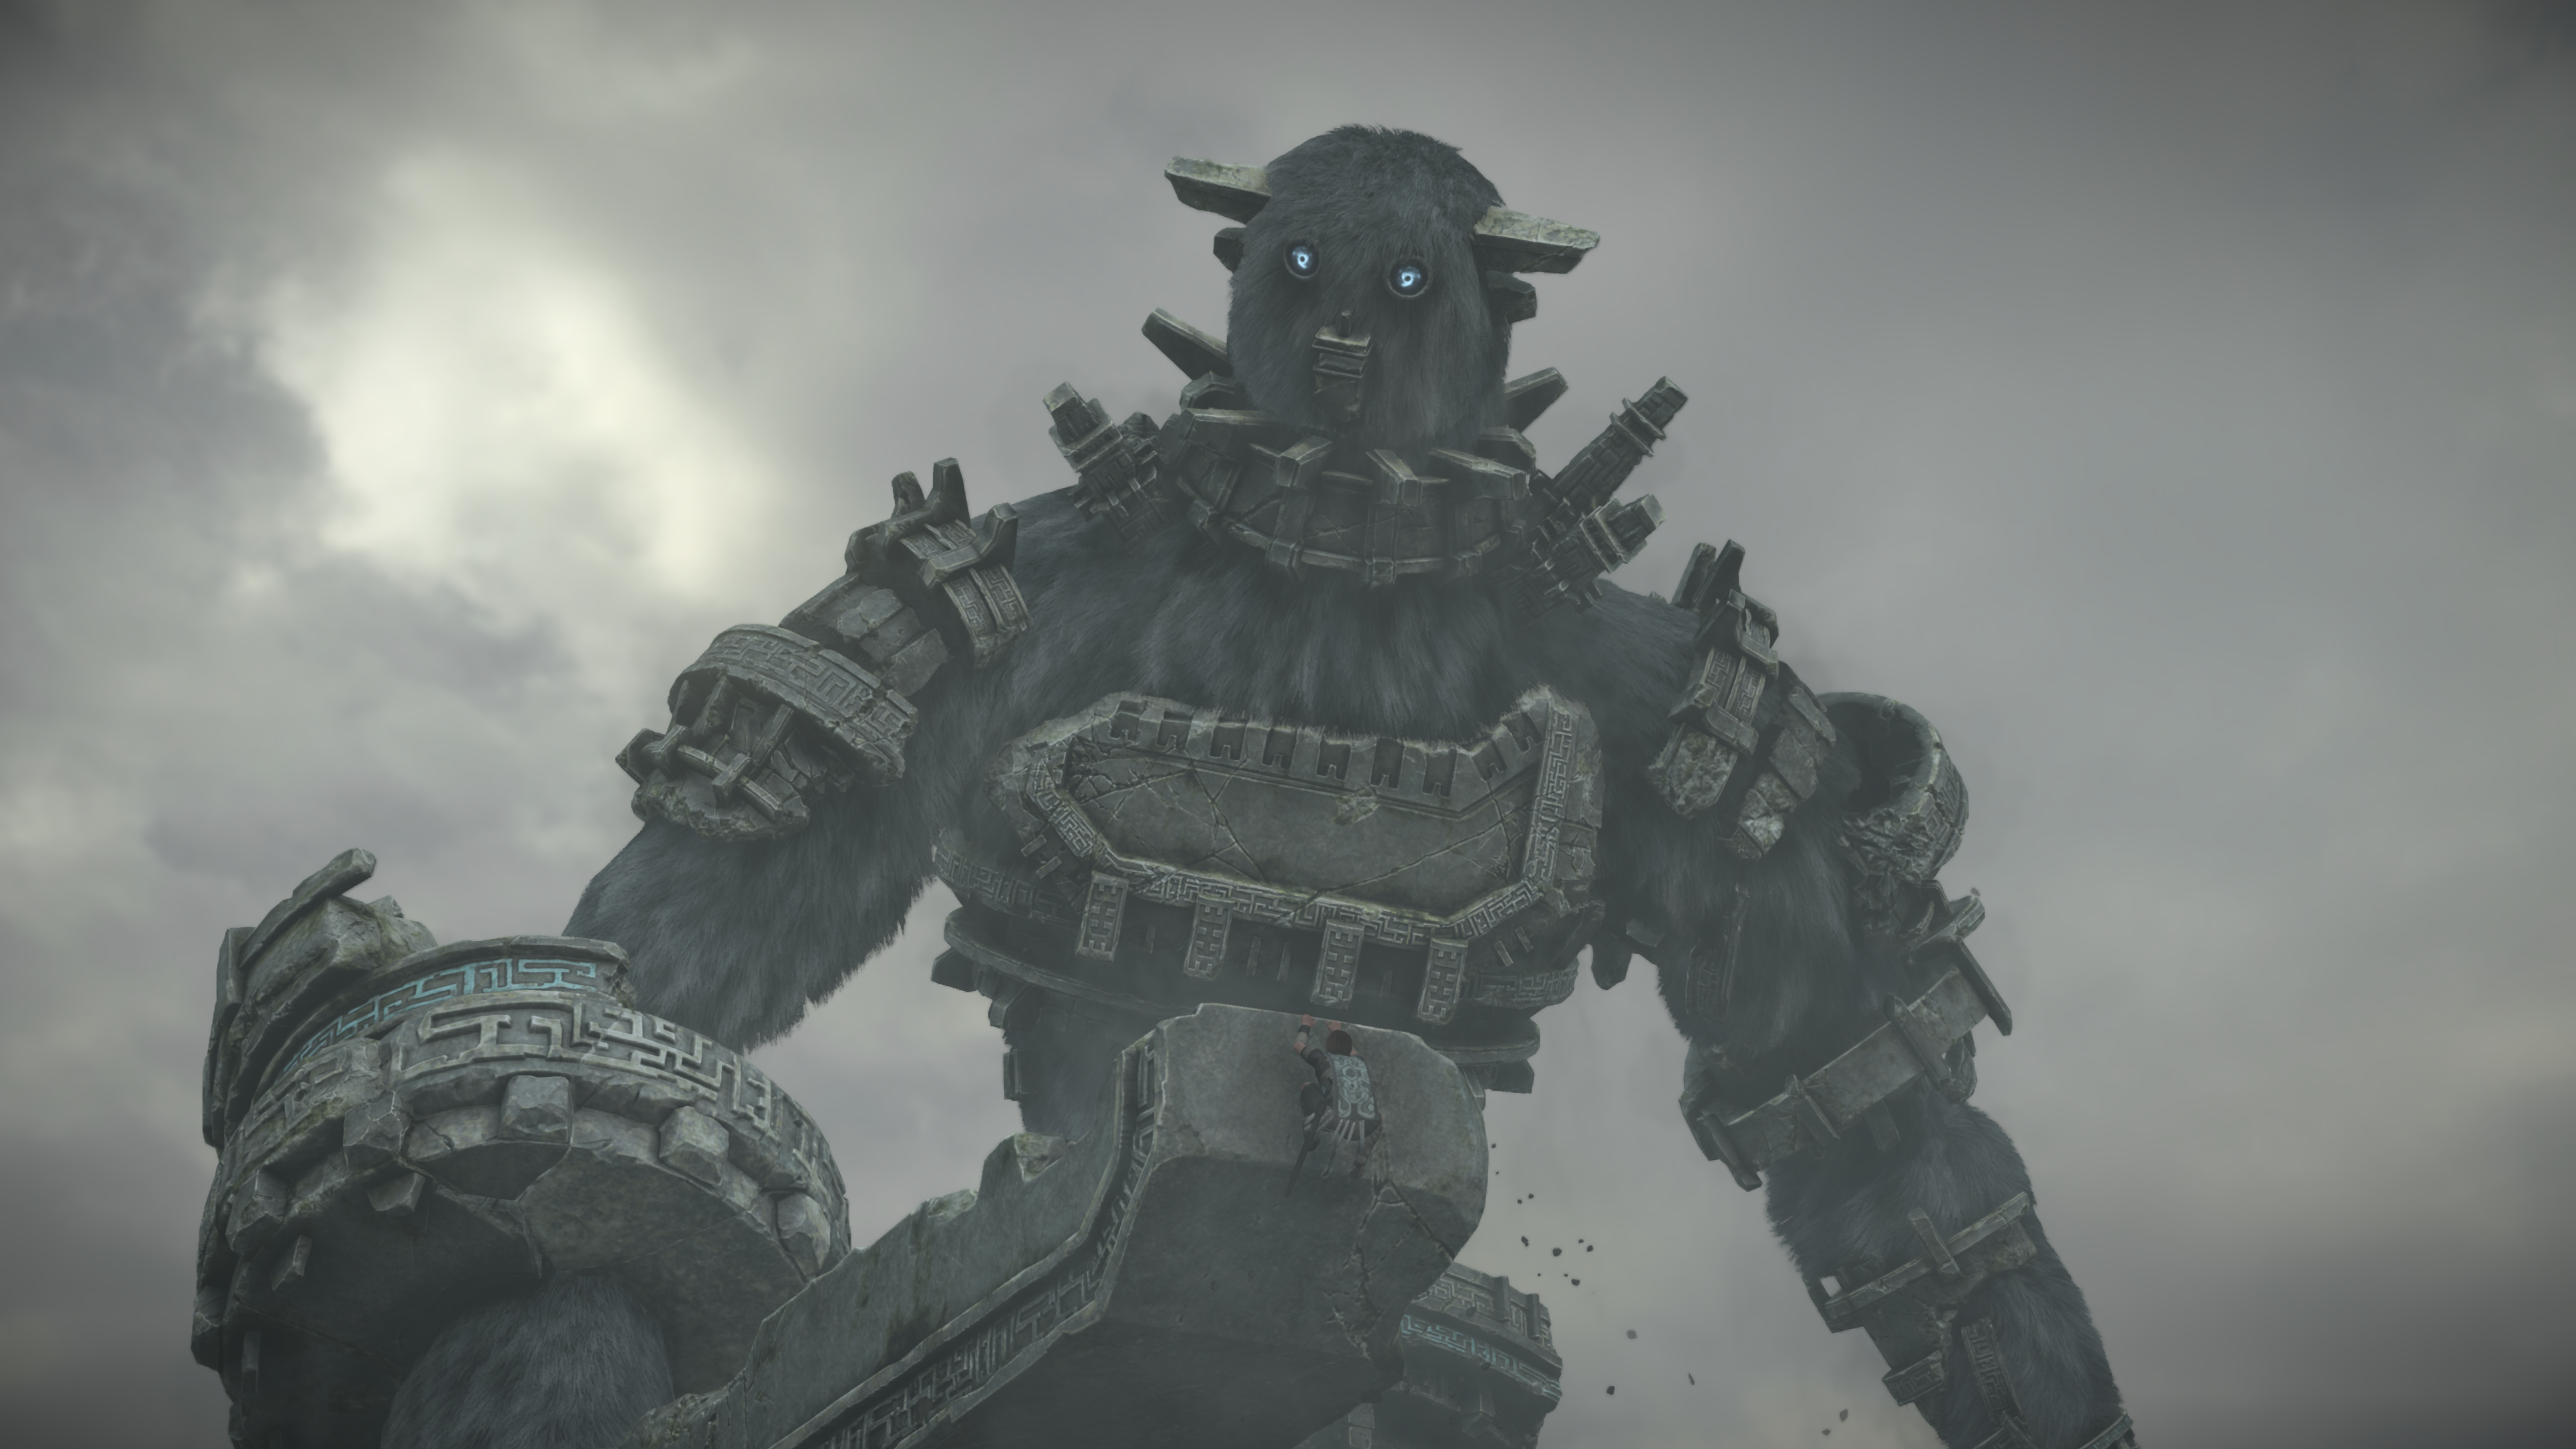 Shadow Of The Colossus PS4 Gameplay Videos Showcase Epic Boss Battles -  GameSpot